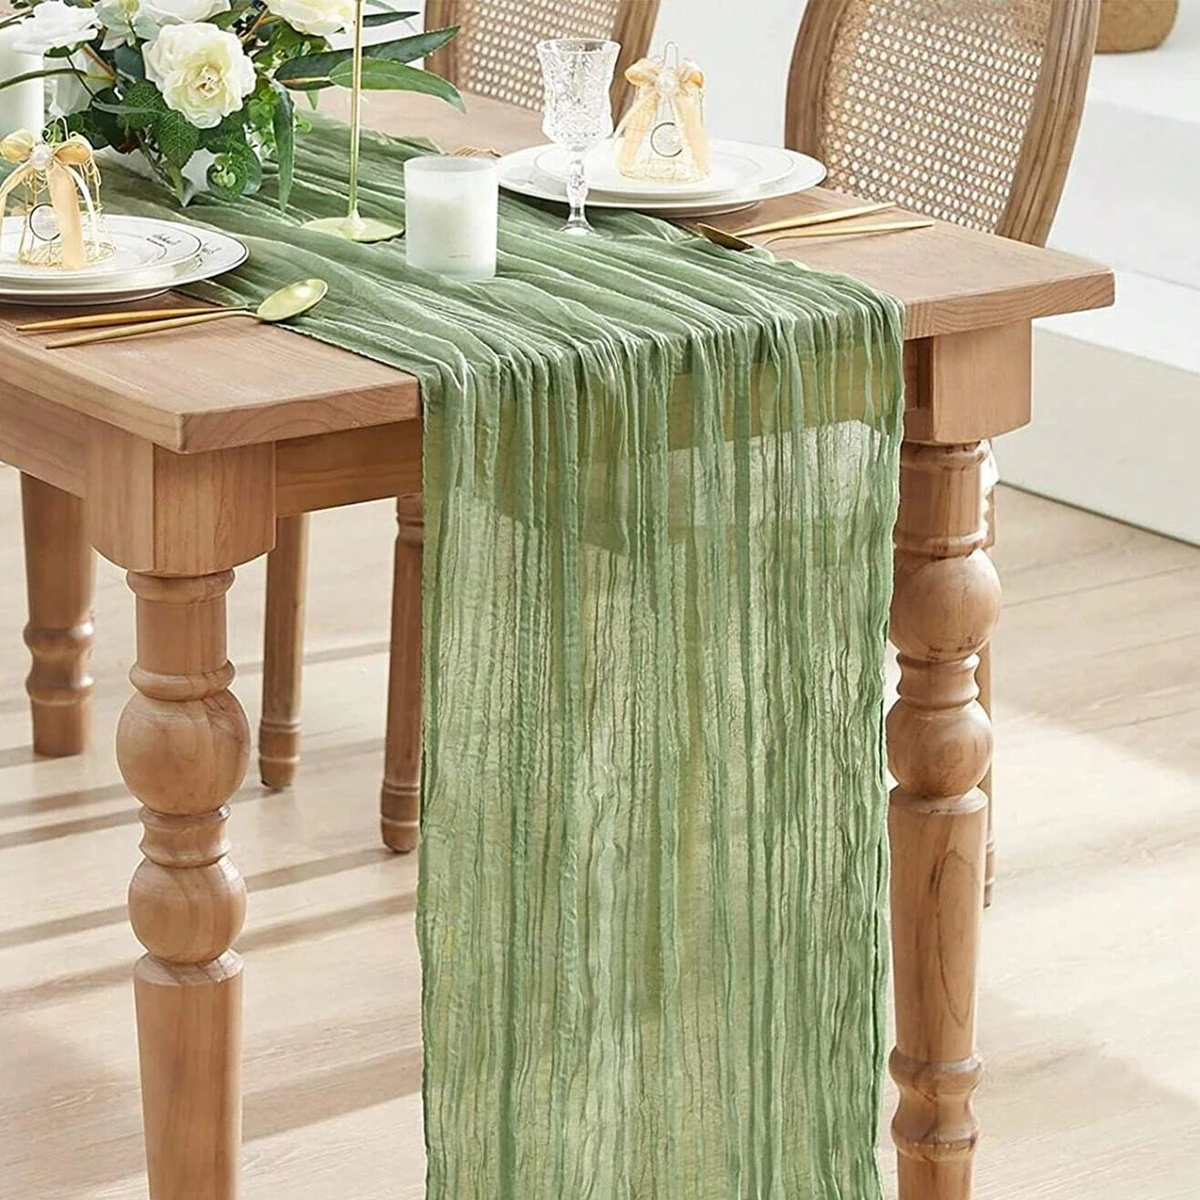 

Semi-Sheer Gauze Table Runner Burlap Cheesecloth Setting Dining Rustic Country Wedding Birthday Decor Vintage Retro Table Linens